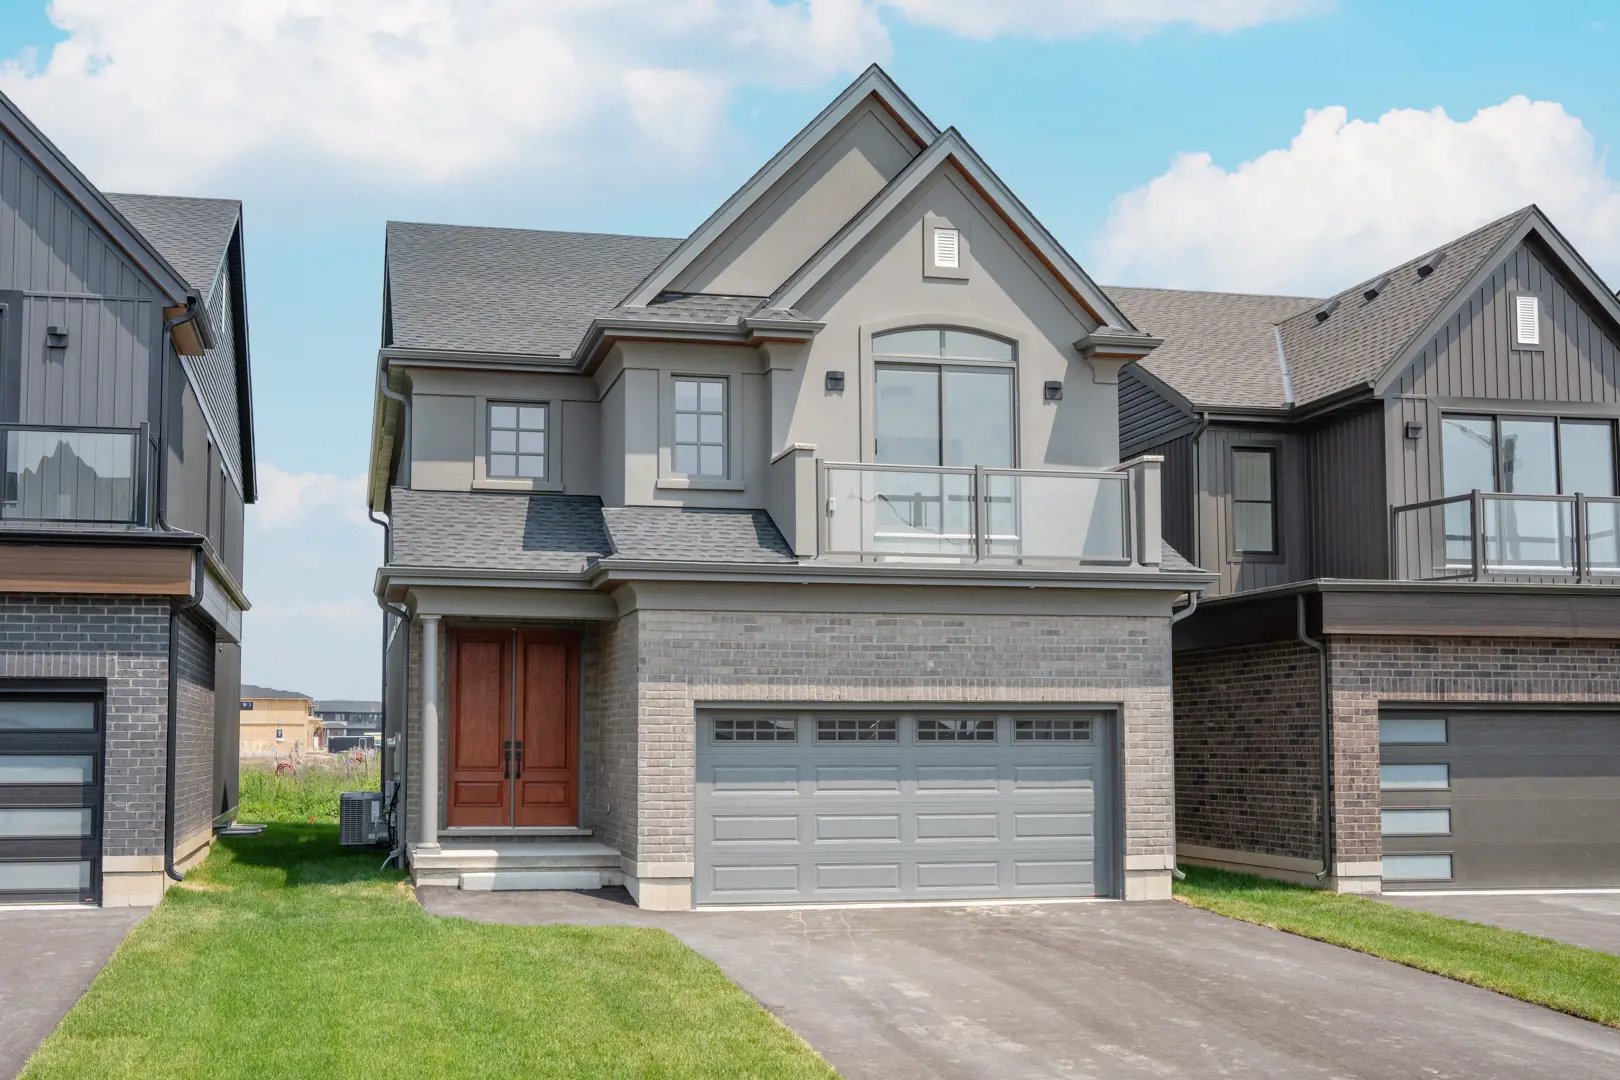 7 New Pre Construction Towns and Detached Homes for sale in Woolwich